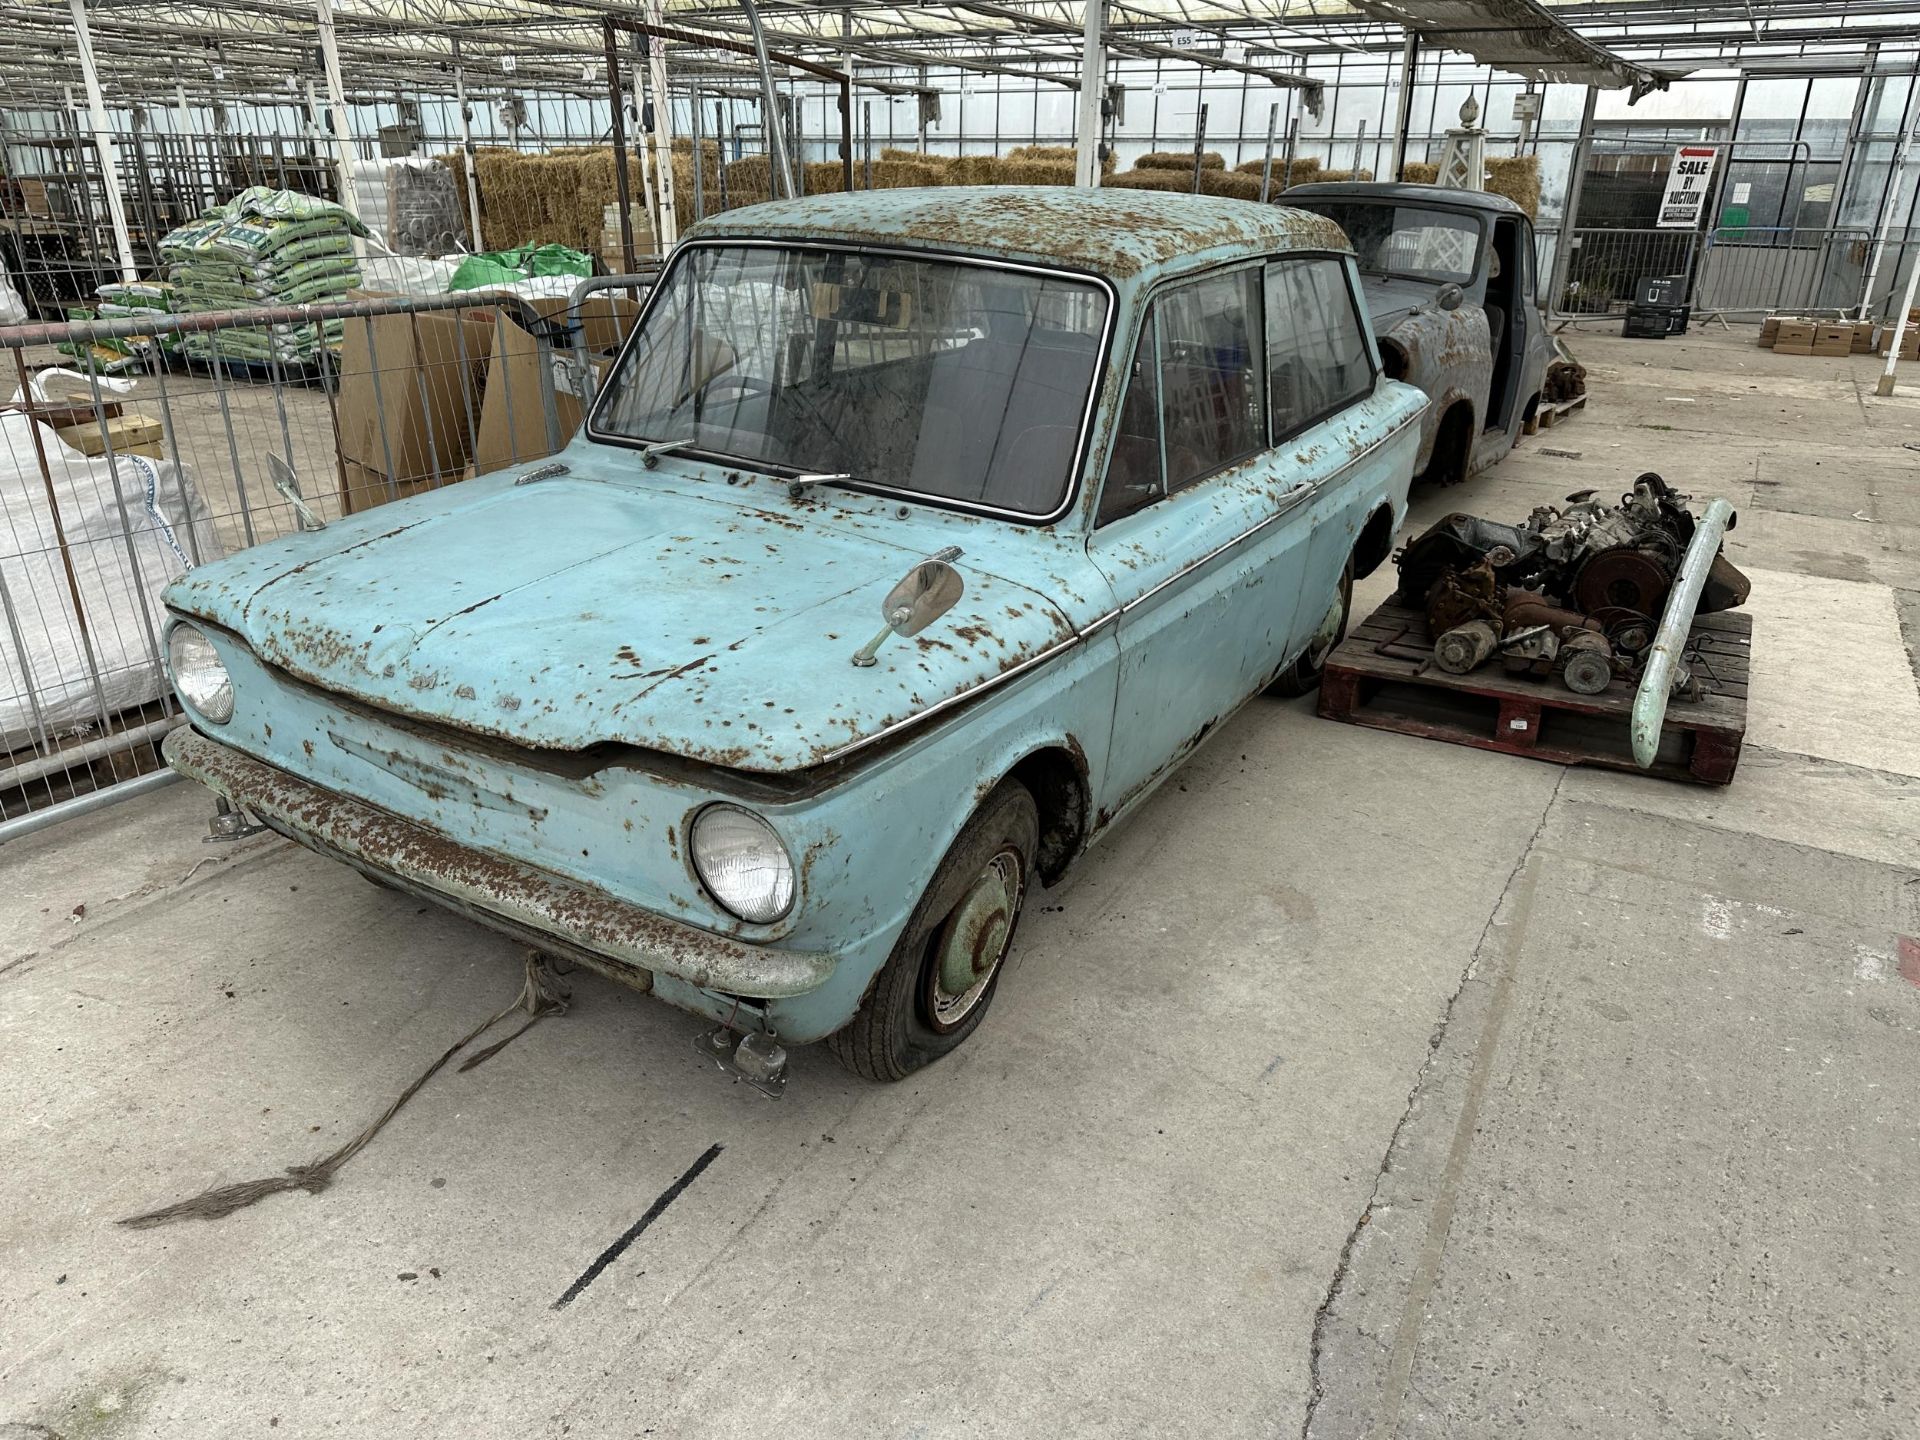 A VINTAGE HILMAN IMP BARN FIND RESTORATION PROJECT COMPLETE WITH AN ASSORTMENT OF SPARE PARTS TO